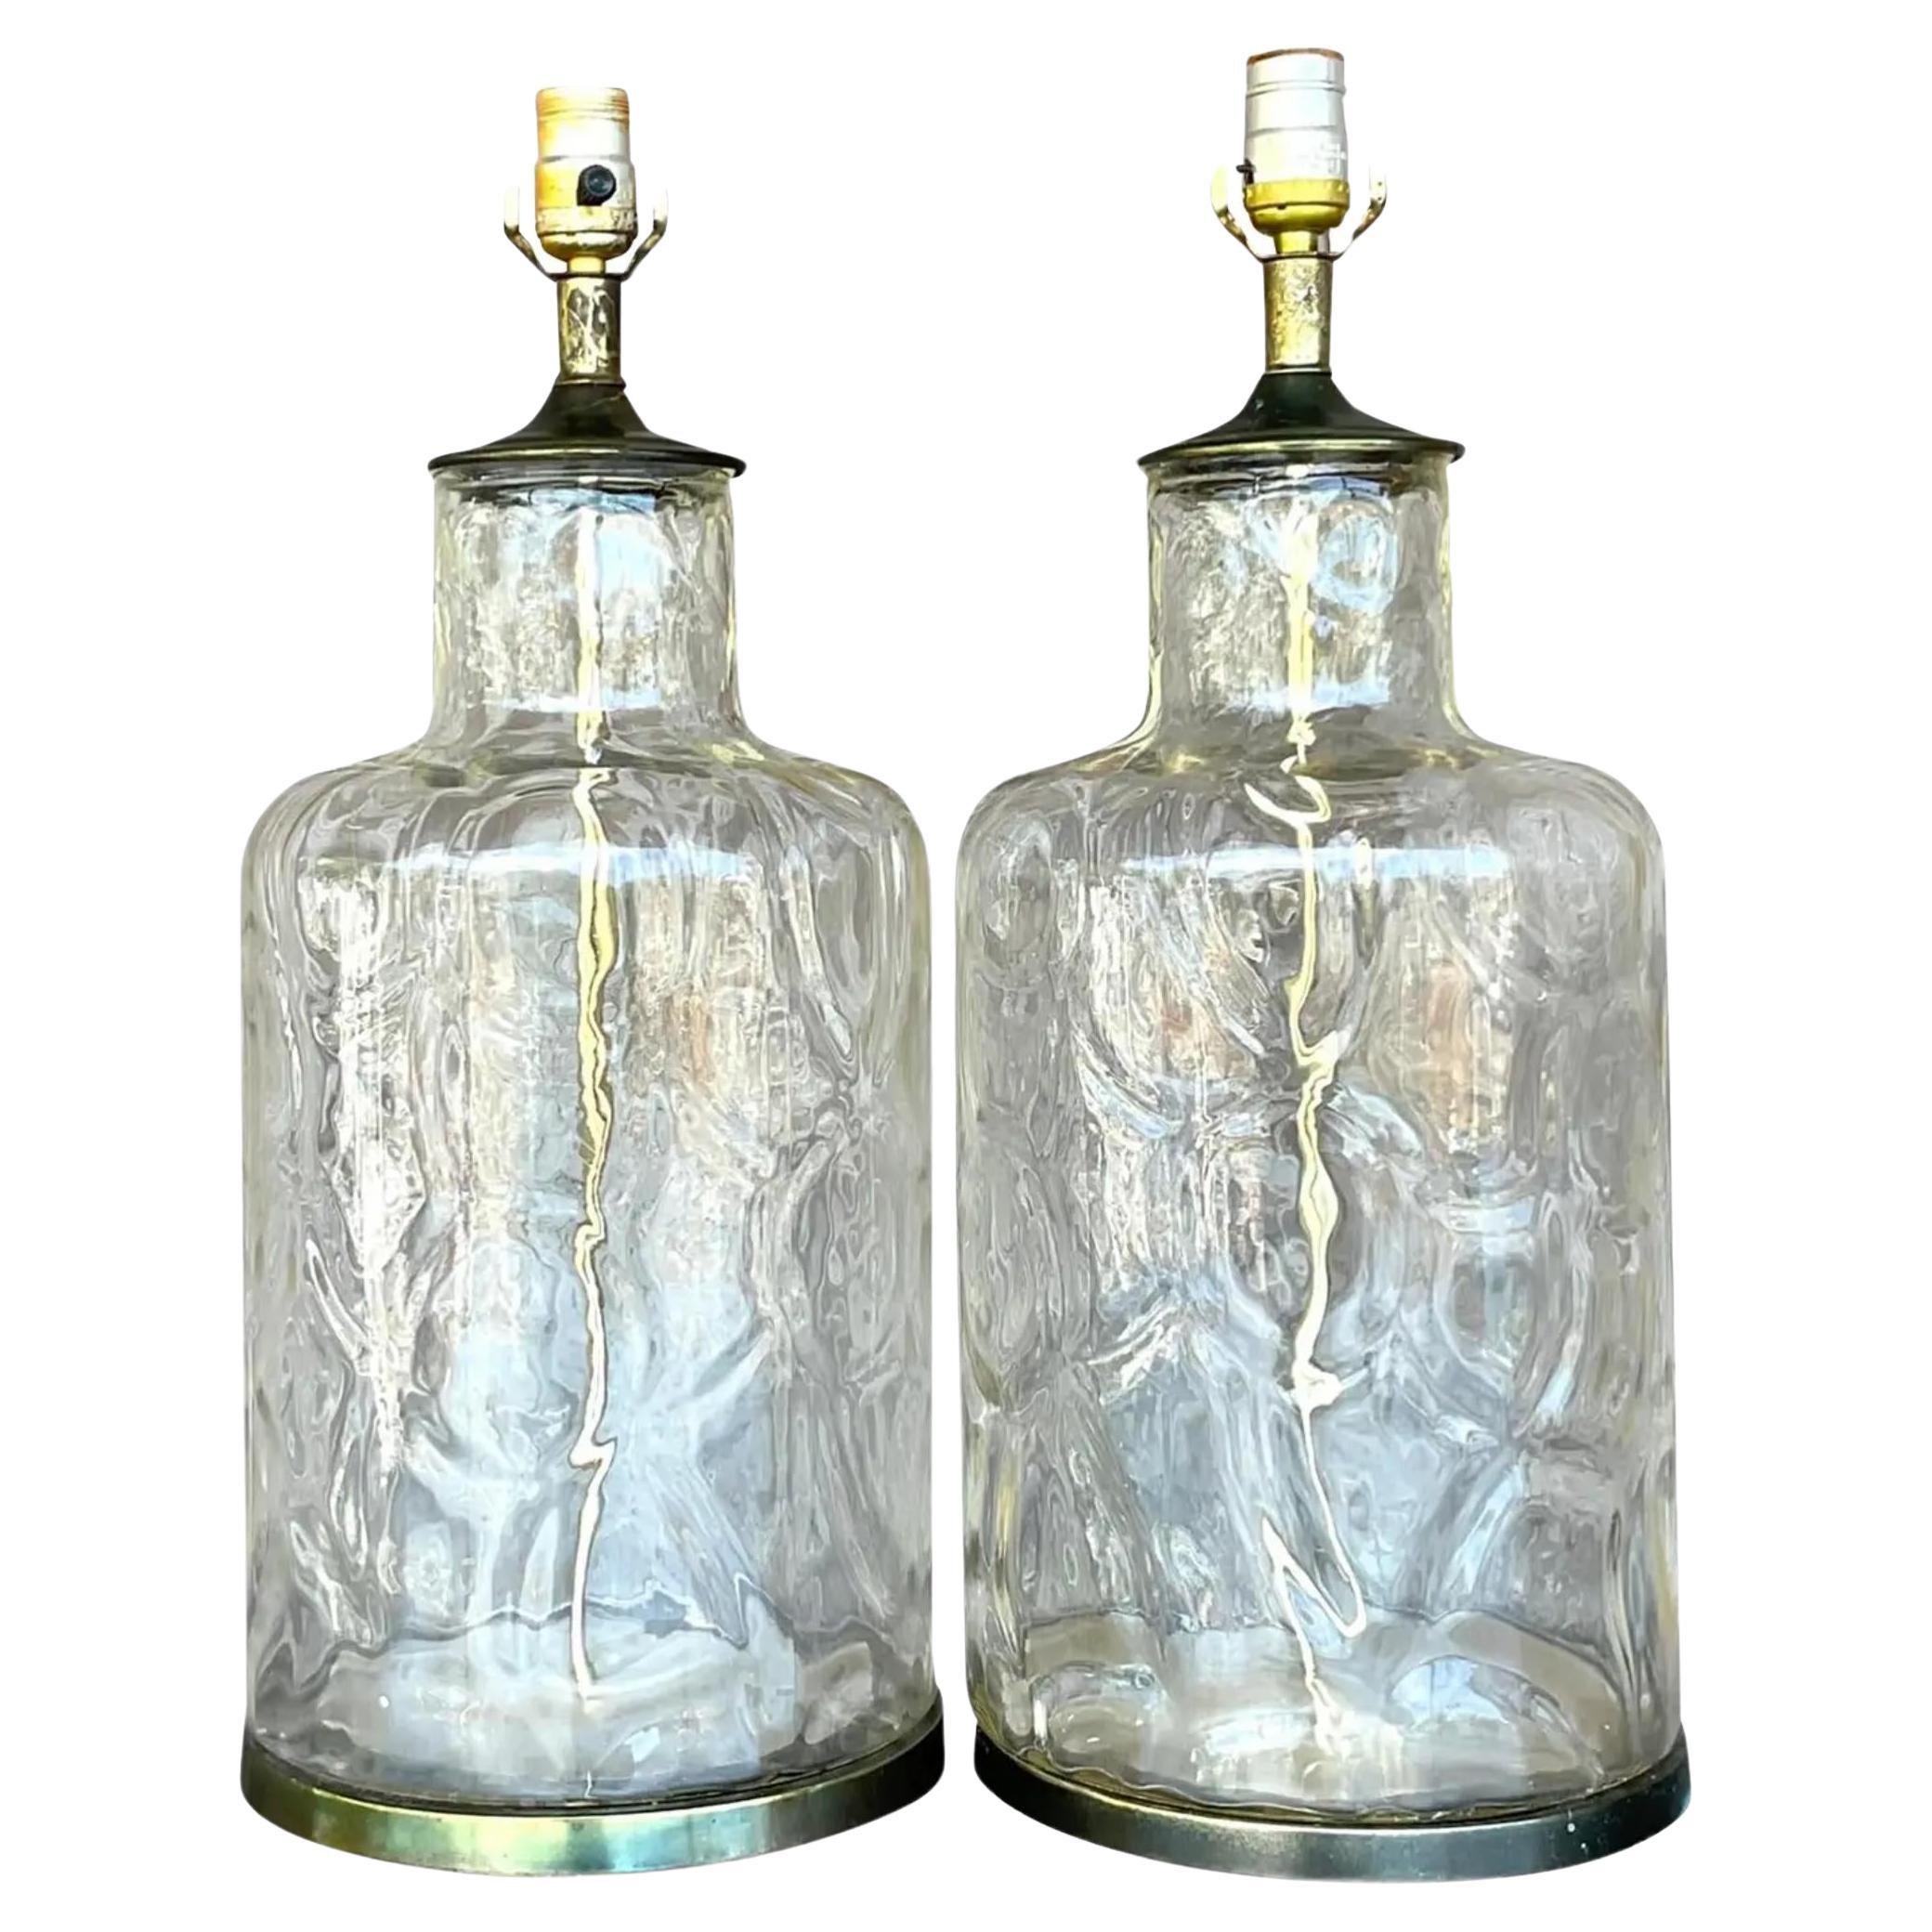 Vintage Boho Ripple Glass Table Lamps - a Pair For Sale